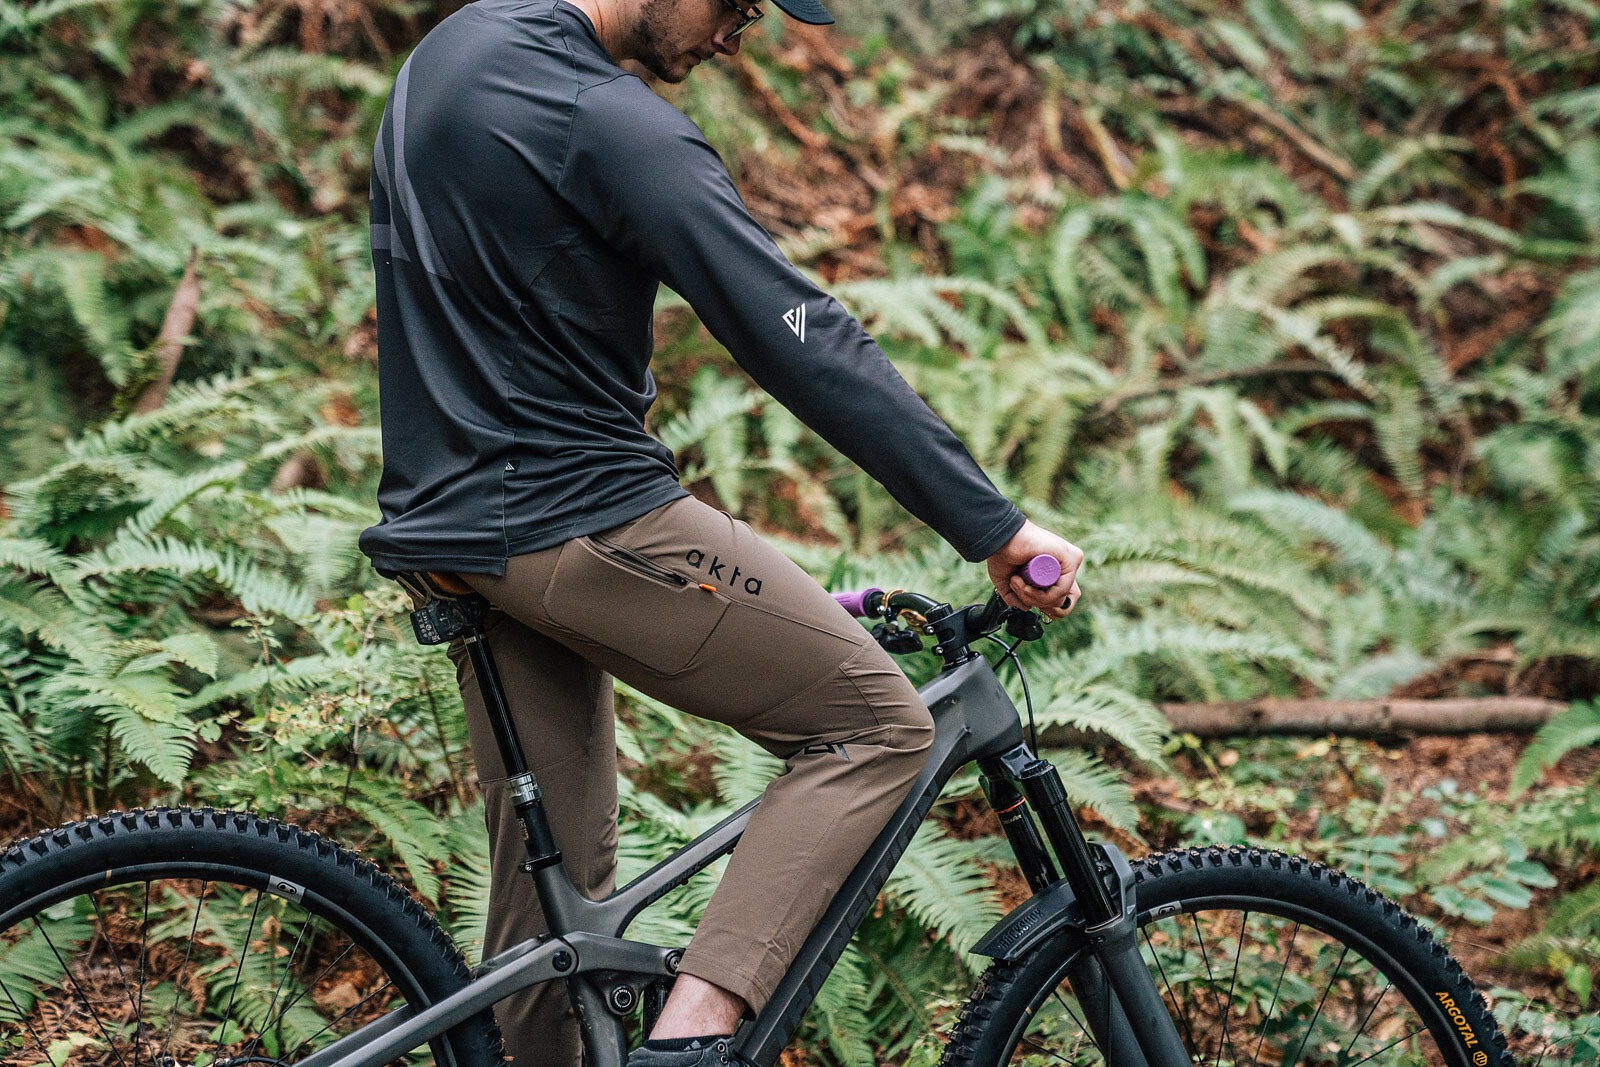 Apparel Review, akta Trail Pants and LS Trail Jersey Review